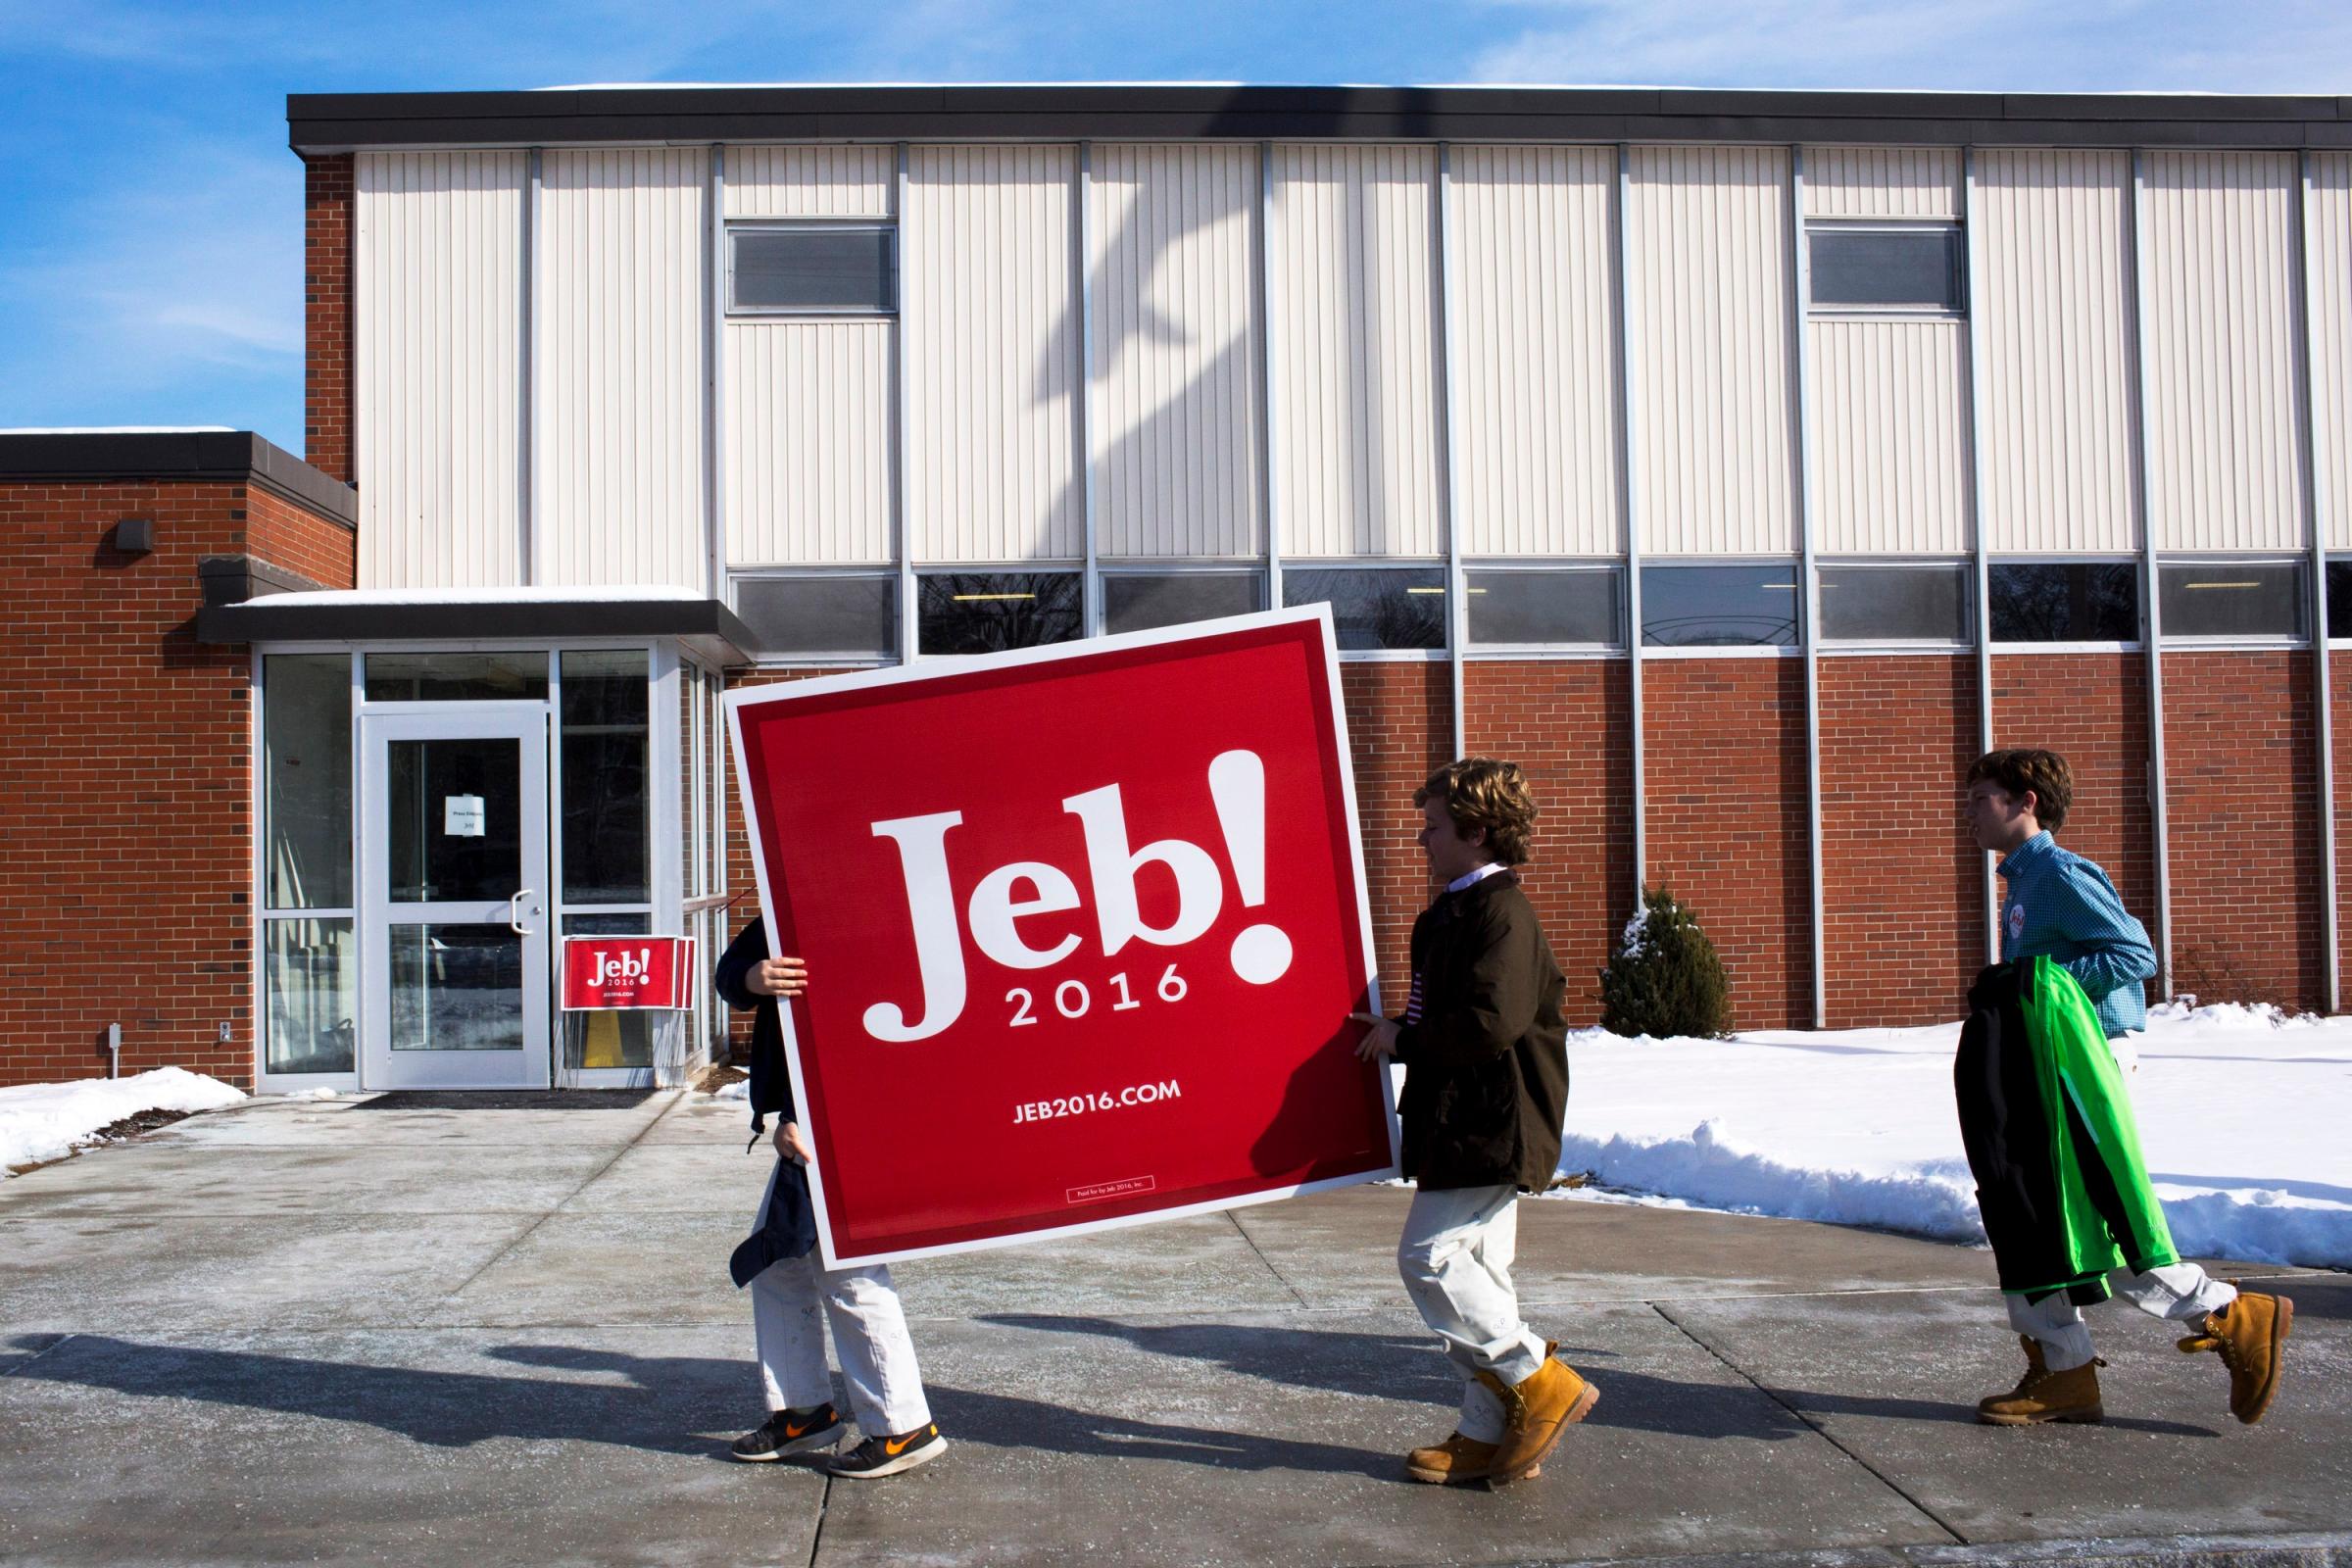 Supporters arrive at a town hall event for Republican presidential candidate Jeb Bush in Bedford, N.H. on Feb. 6, 2016.